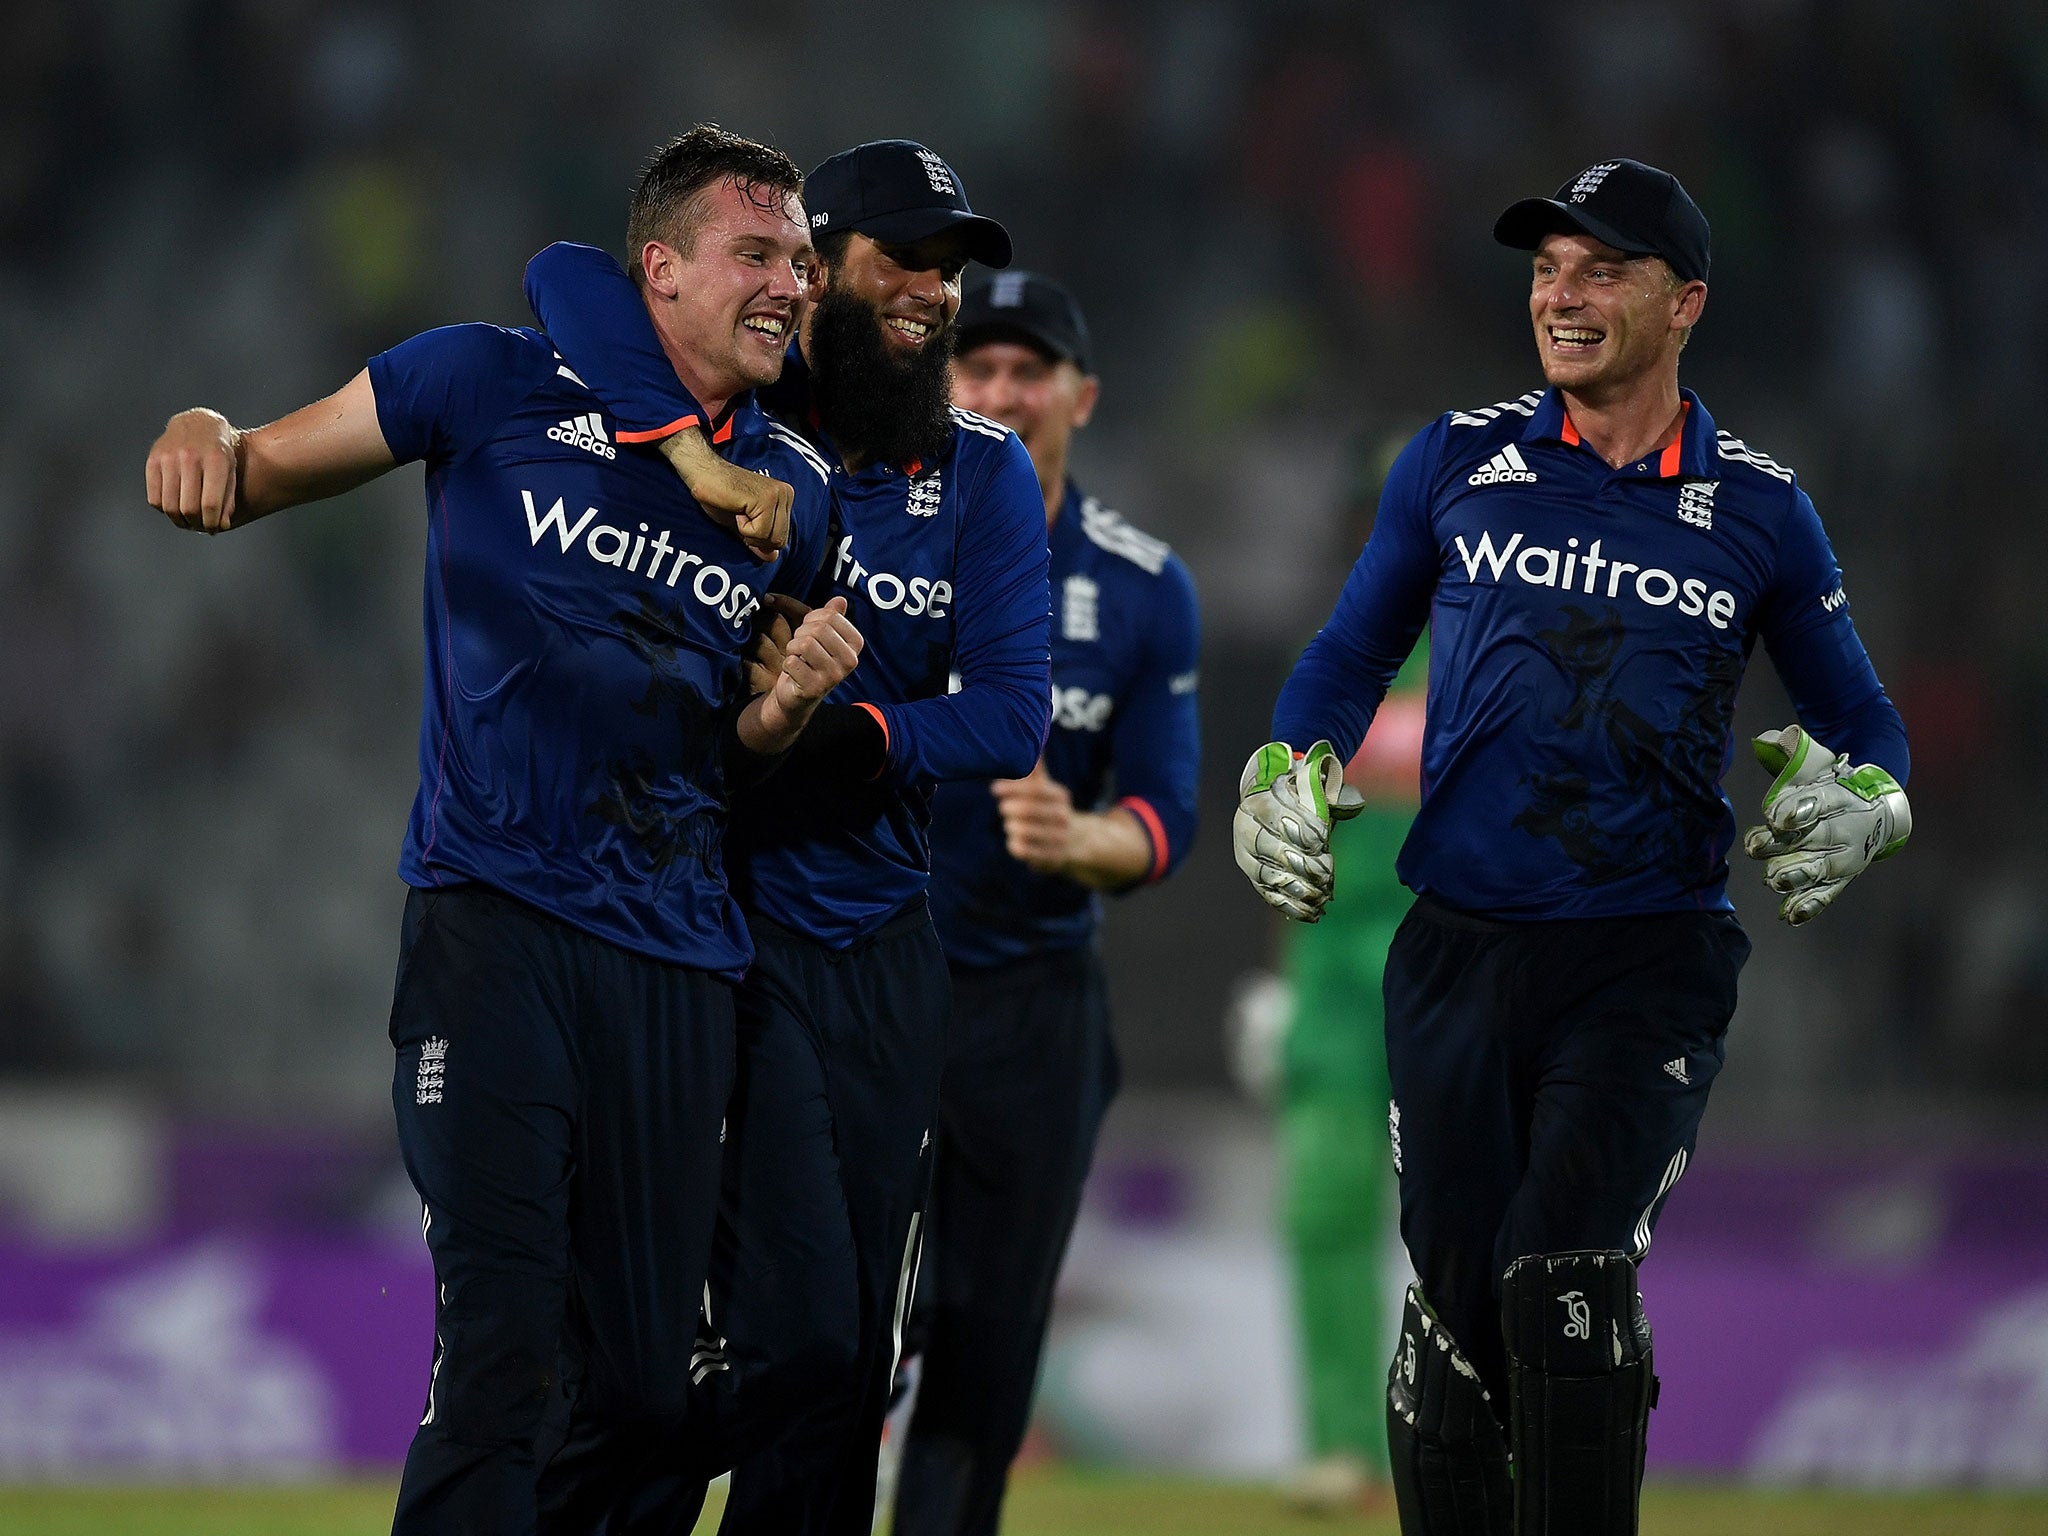 Jake Ball of England celebrates with Moeen Ali and captain Jos Buttler after taking the final wicket of Taskin Ahmed of Bangladesh to win the 1st One Day International